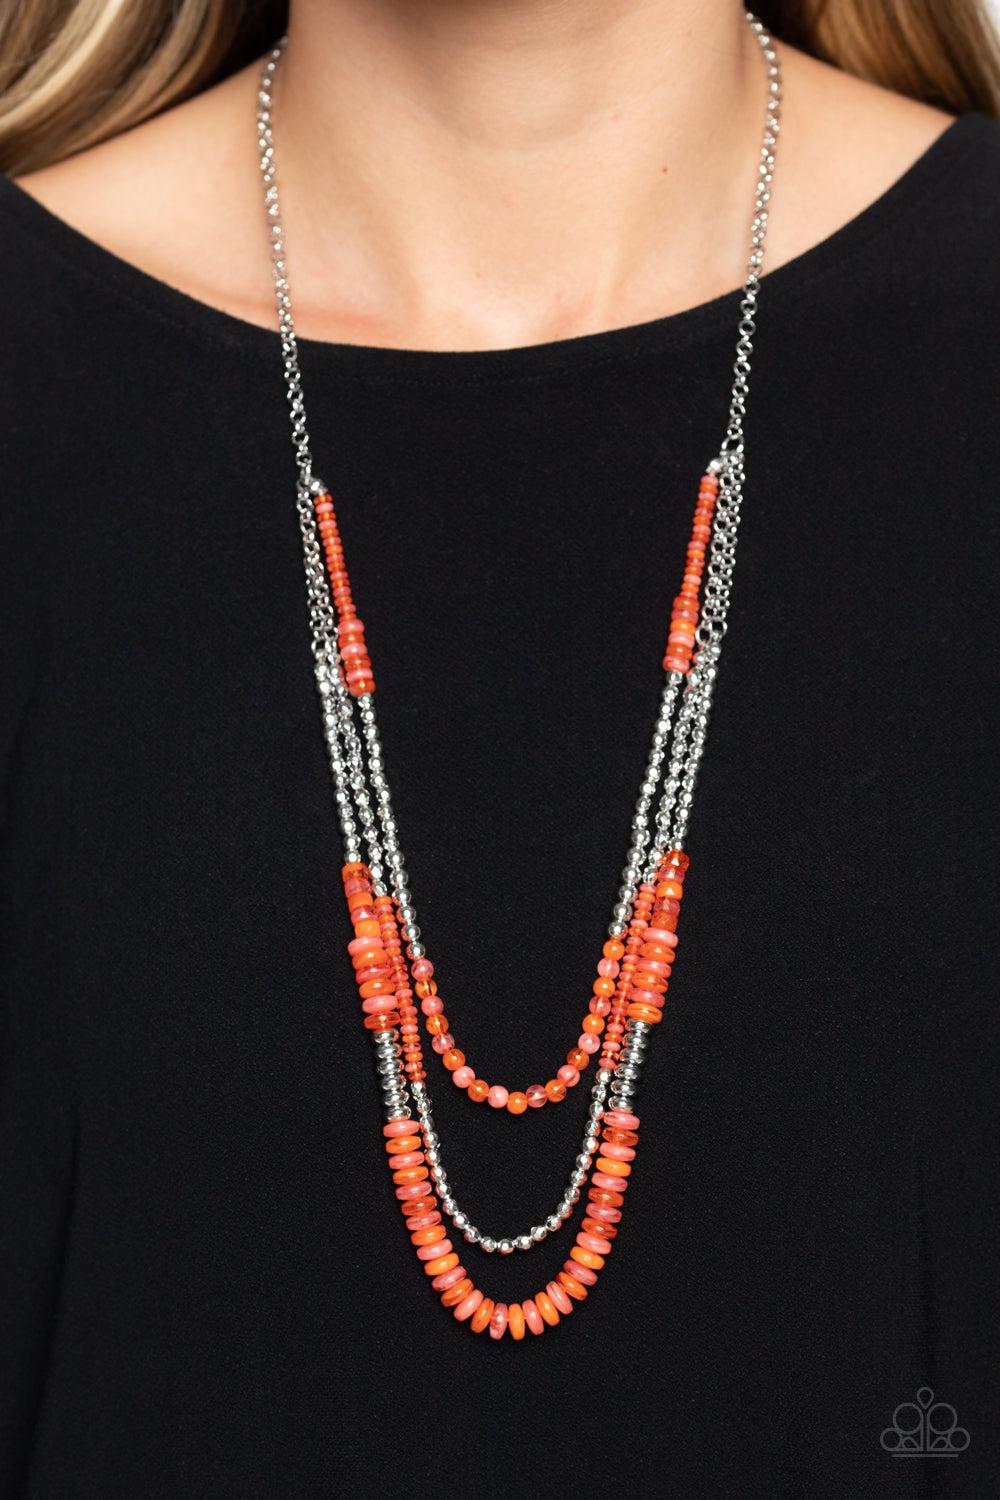 Newly Neverland Orange Necklace - Paparazzi Accessories-on model - CarasShop.com - $5 Jewelry by Cara Jewels